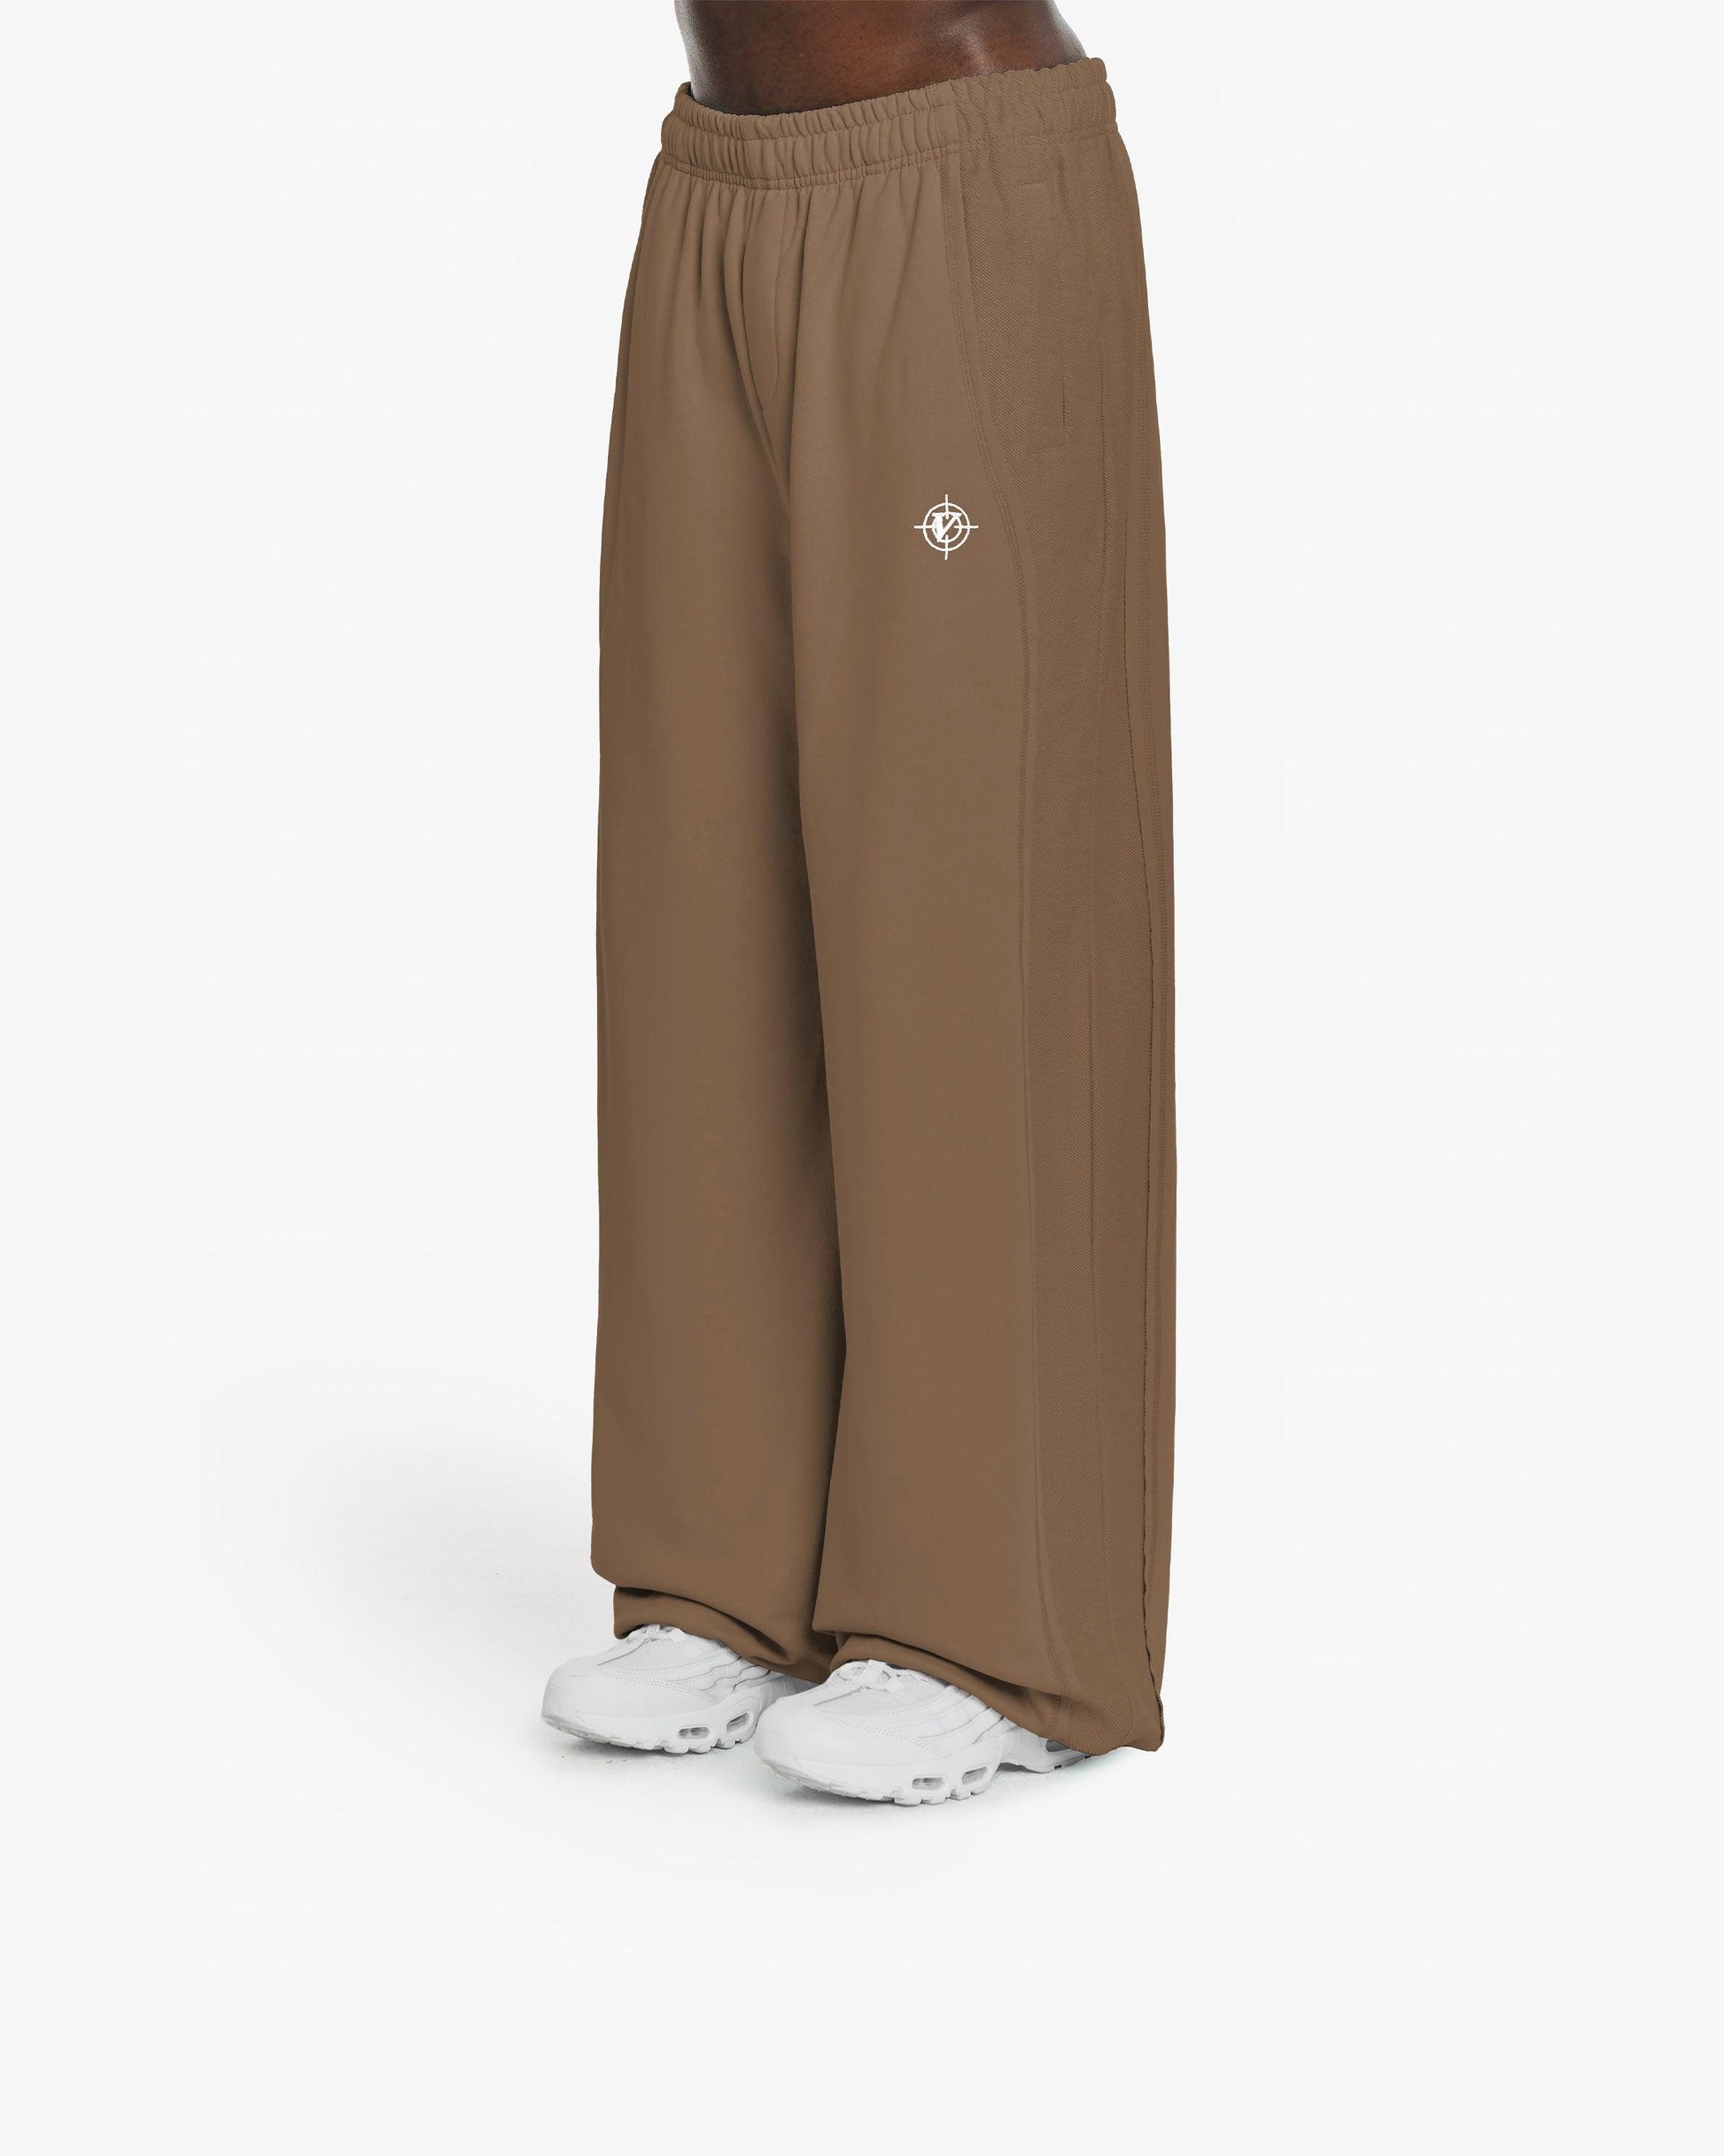 INSIDE OUT JOGGER CHOCOLATE BROWN - VICINITY